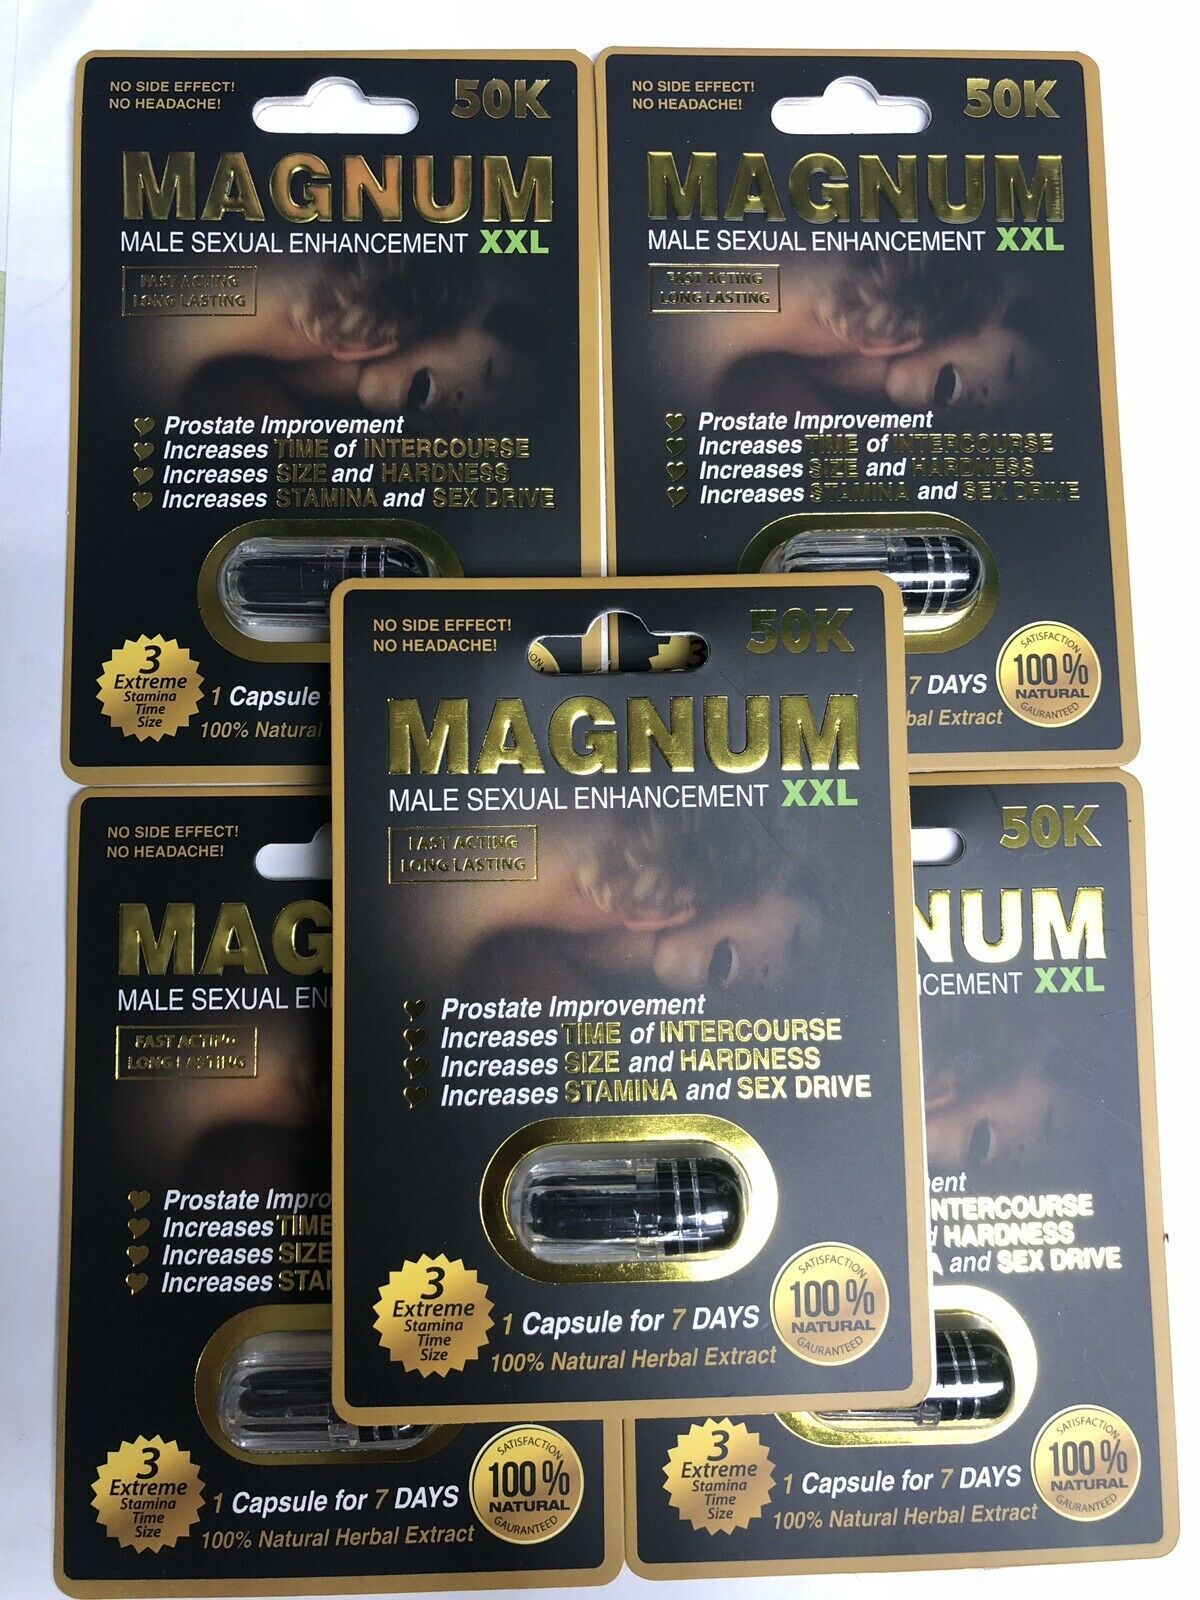 Male Enhancement Pill Magnum Xxl 50k 24 Pack Box Fast Shipping Other Natural Remedies 7300